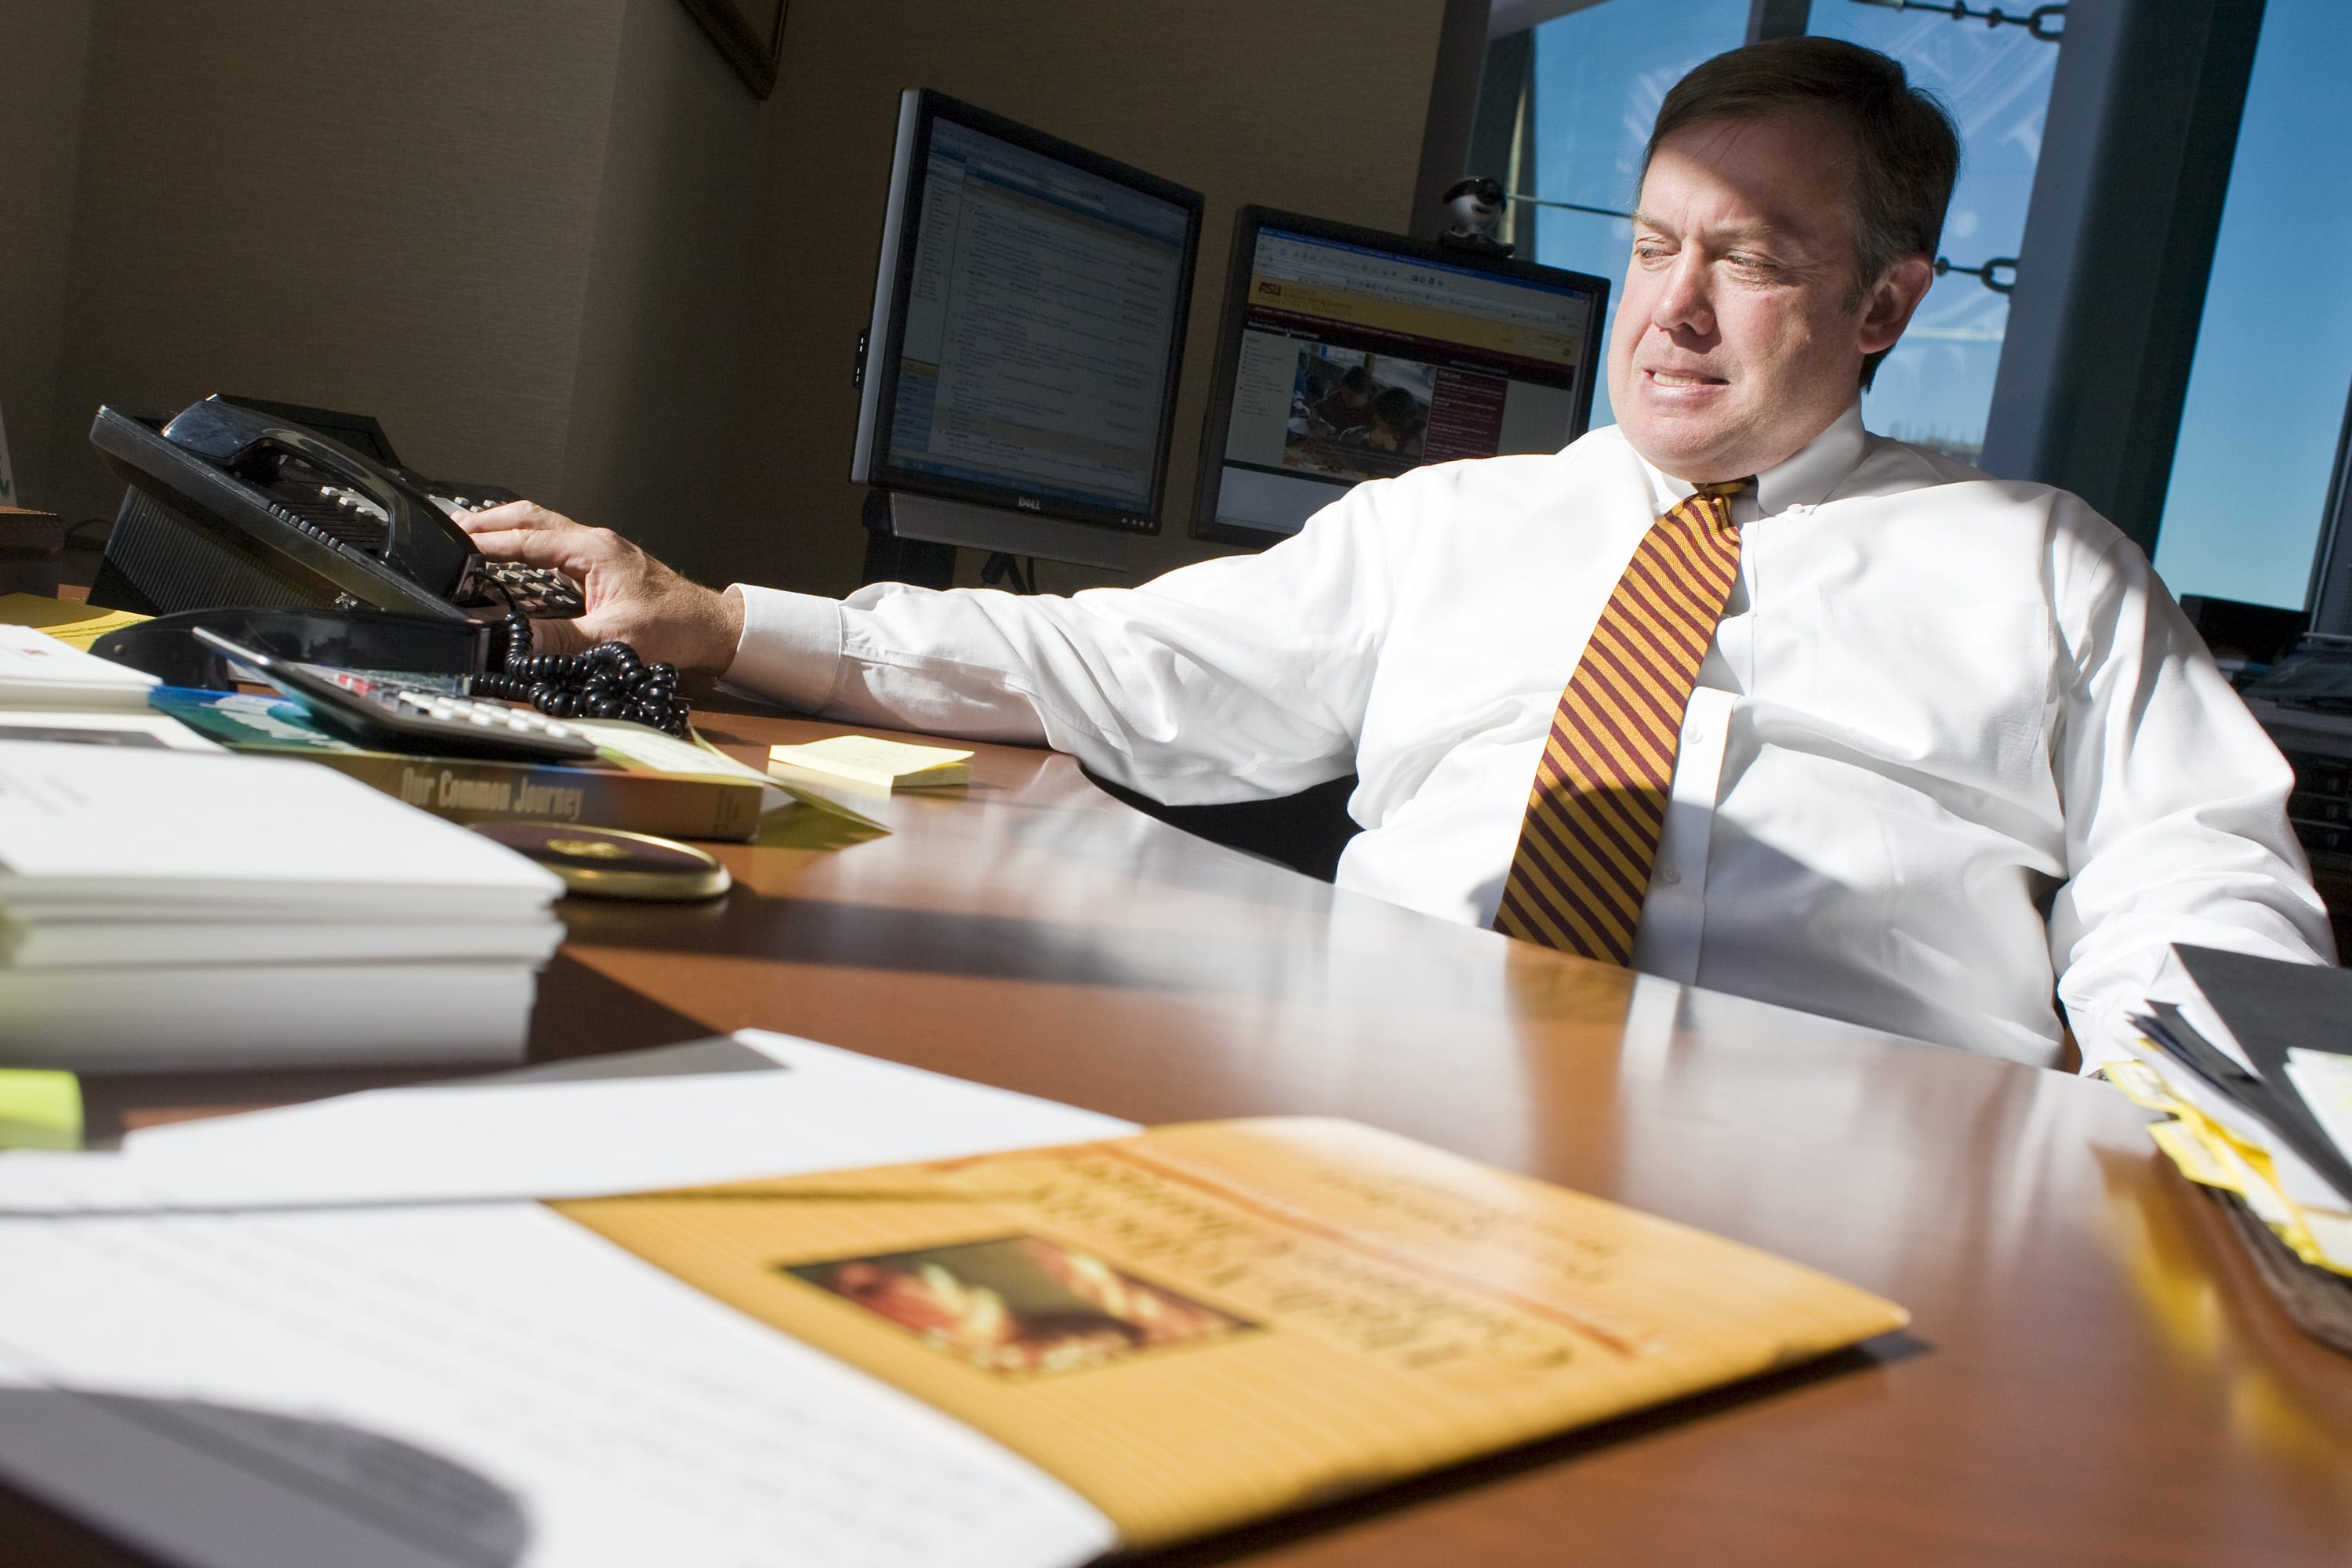 ASU President Michael Crow takes a conference call in his office in 2007.